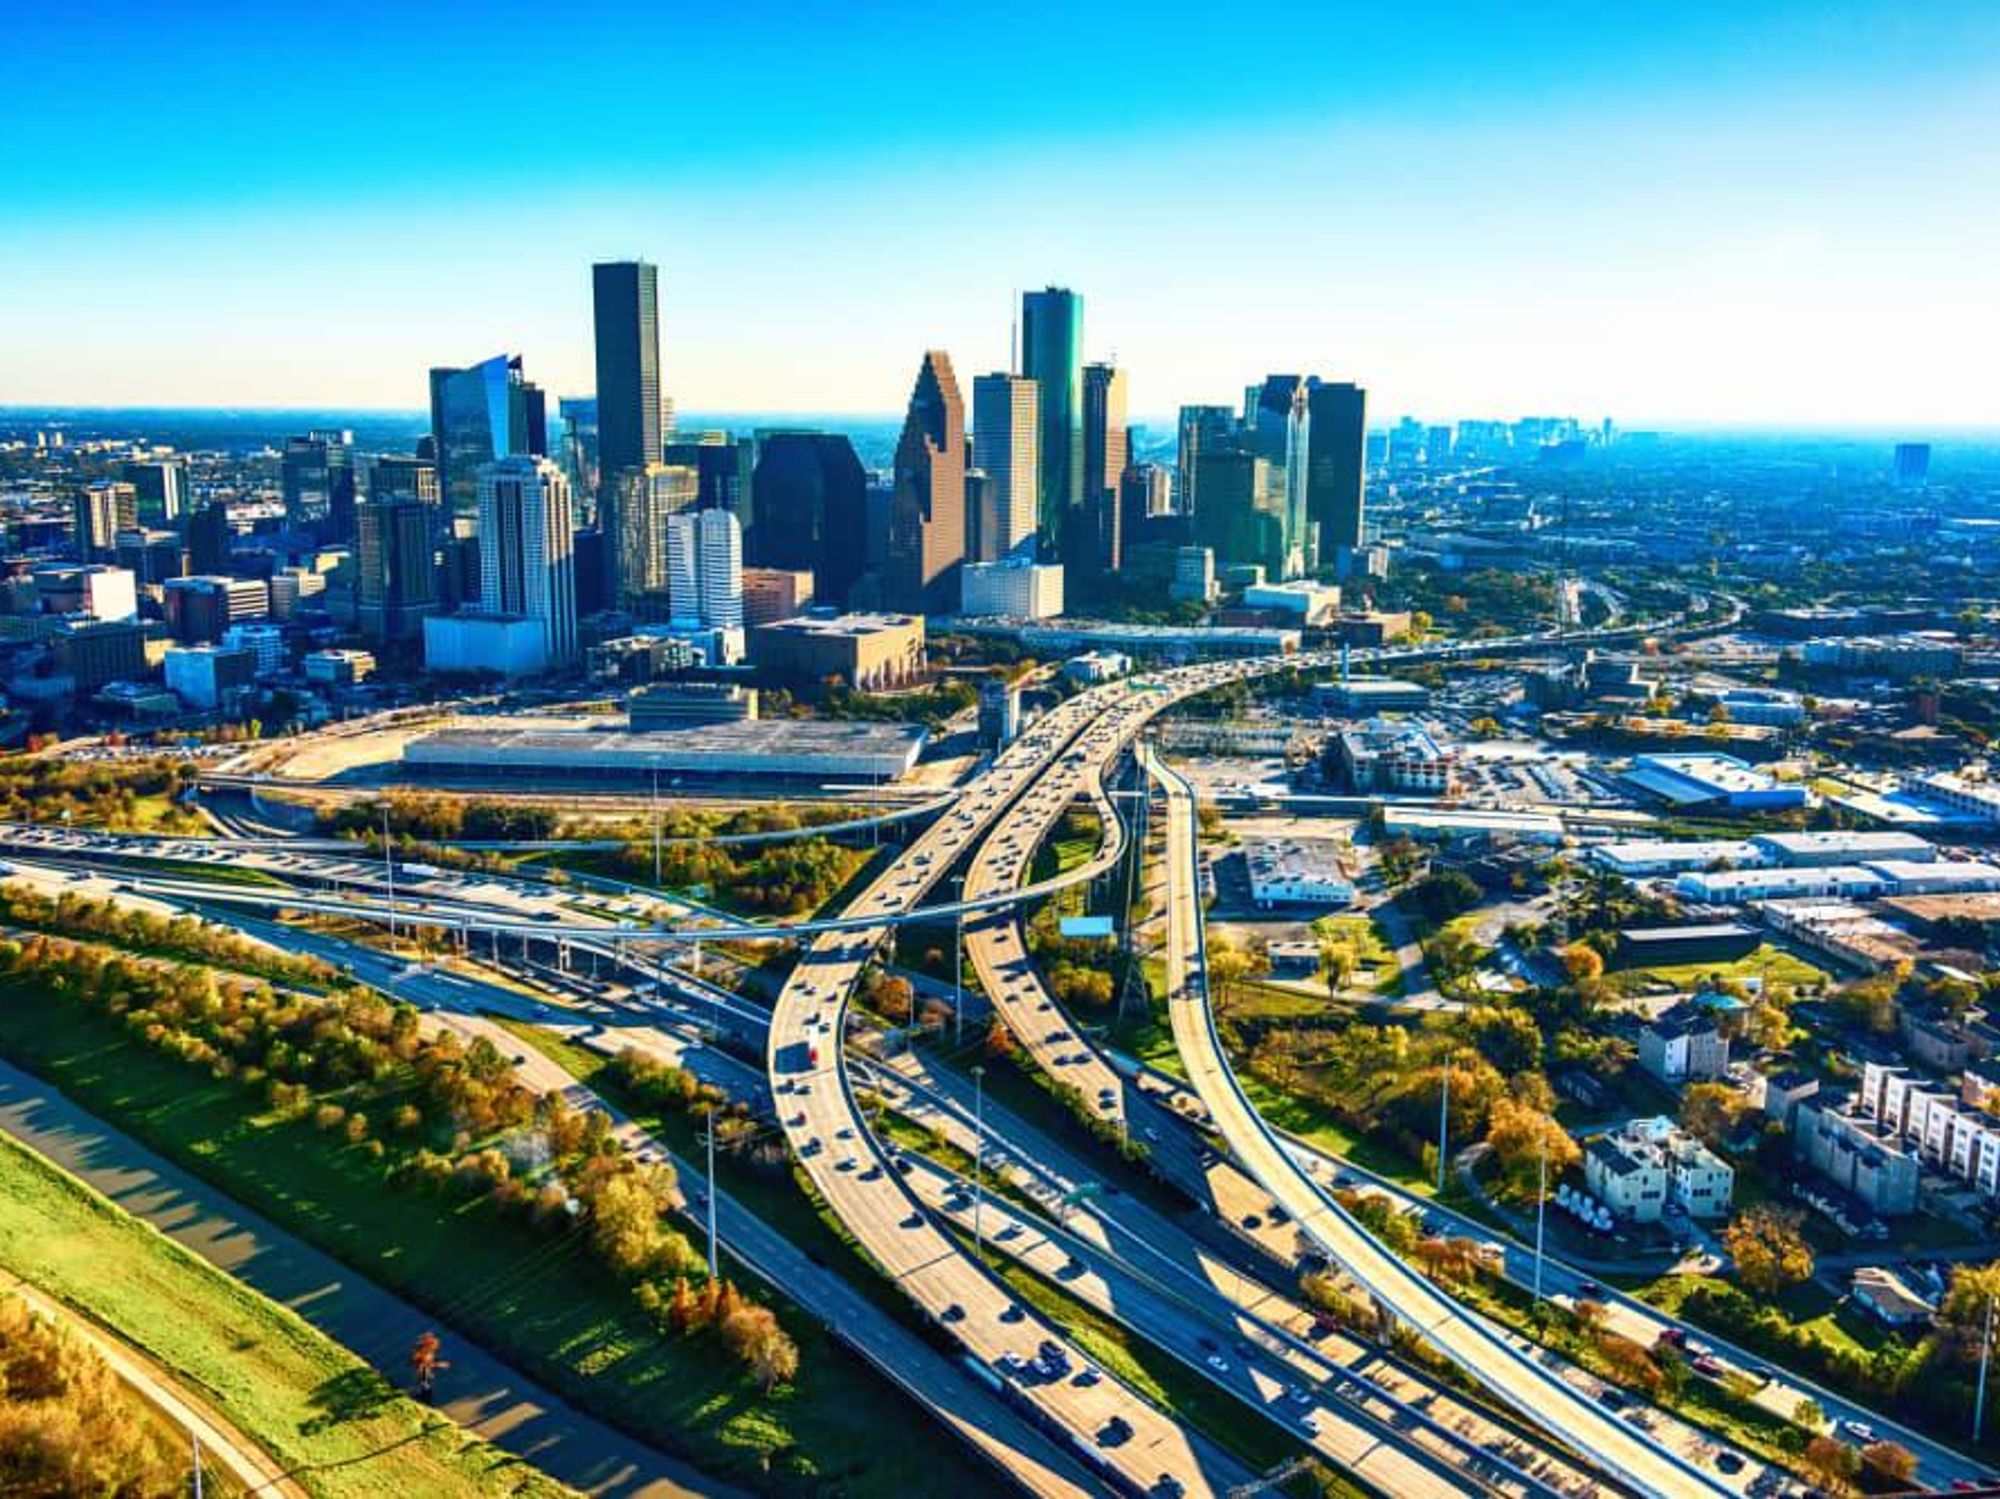 Houston anointed the most diverse city in the U.S. by new report